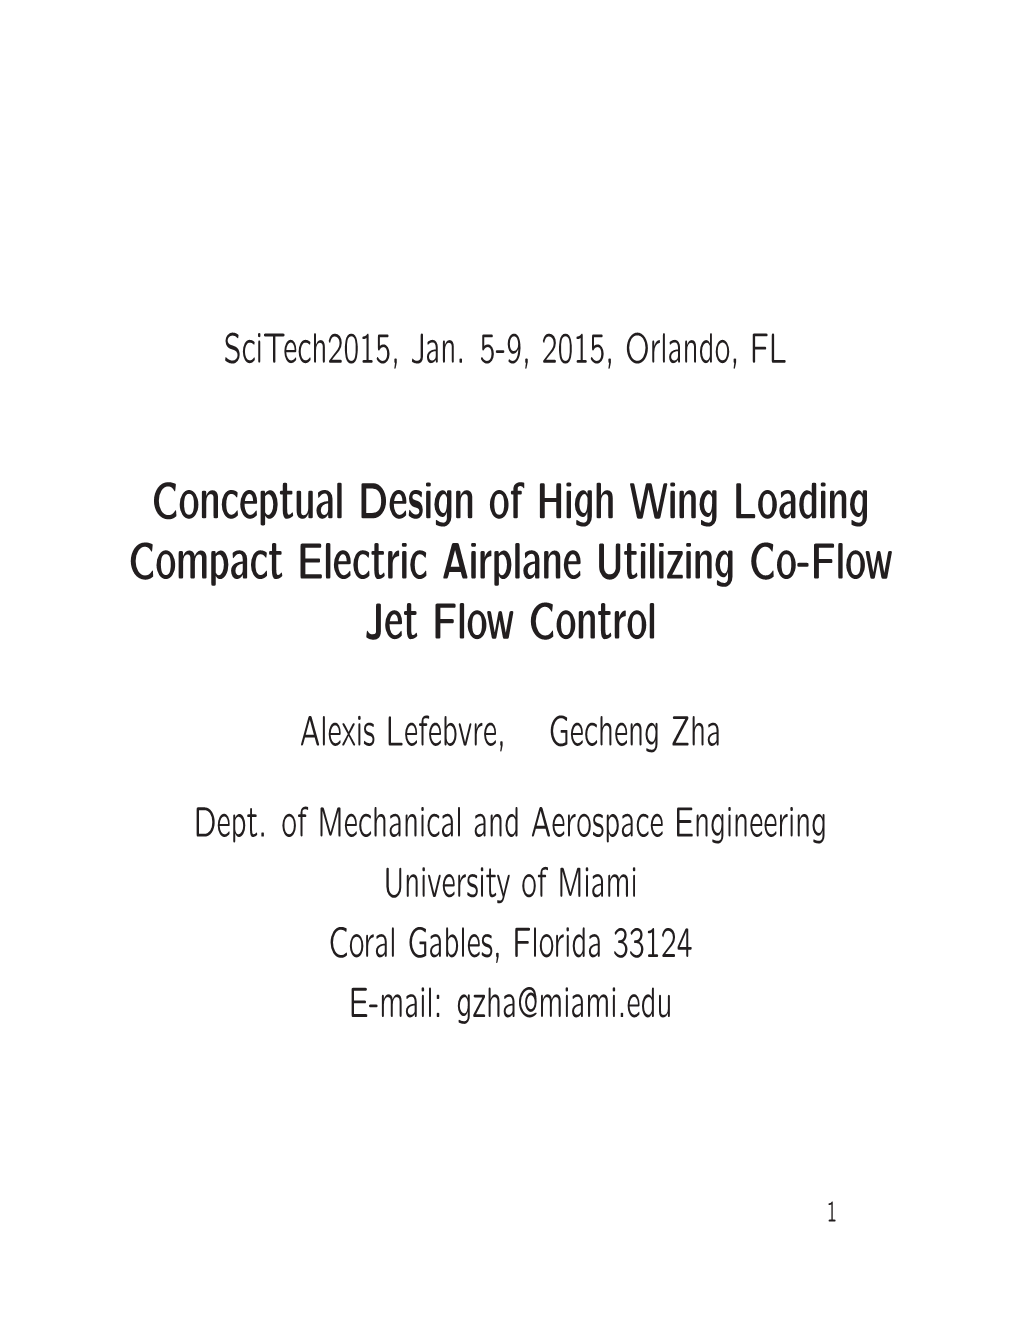 Conceptual Design of High Wing Loading Compact Electric Airplane Utilizing Co-Flow Jet Flow Control